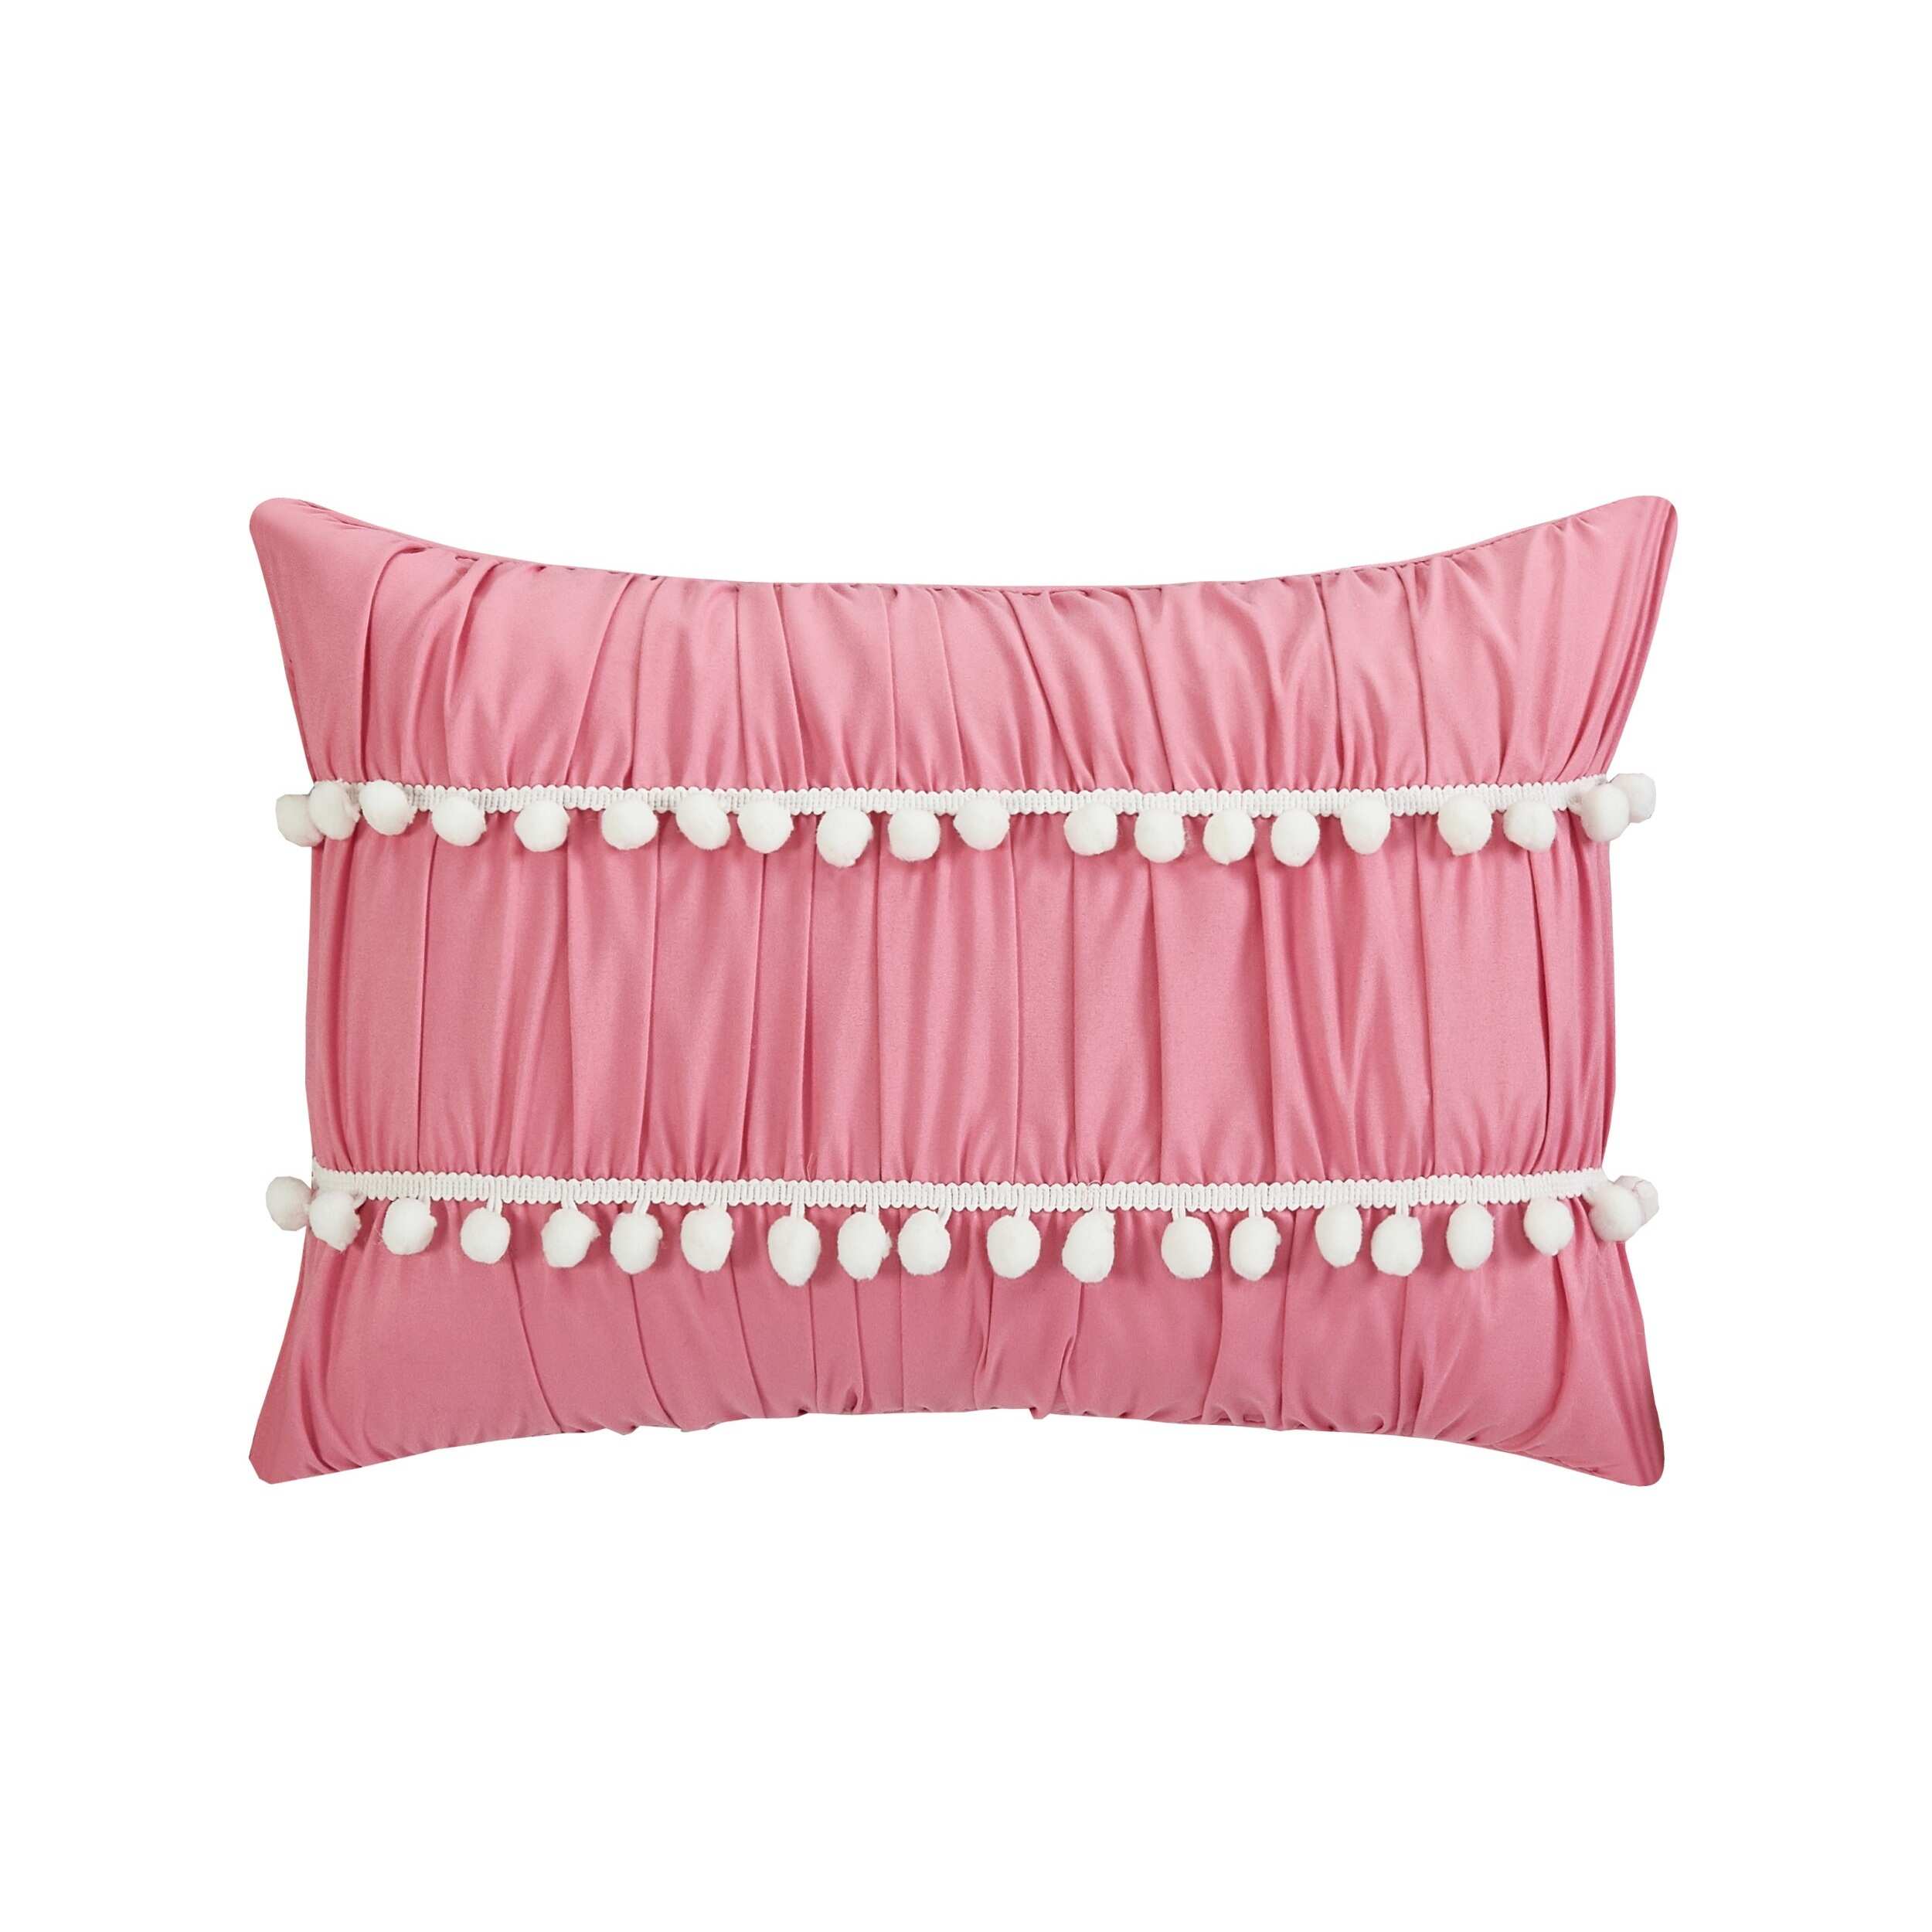 Chic Home Dai Pink Reversible 9-Piece Bed in a Bag Set